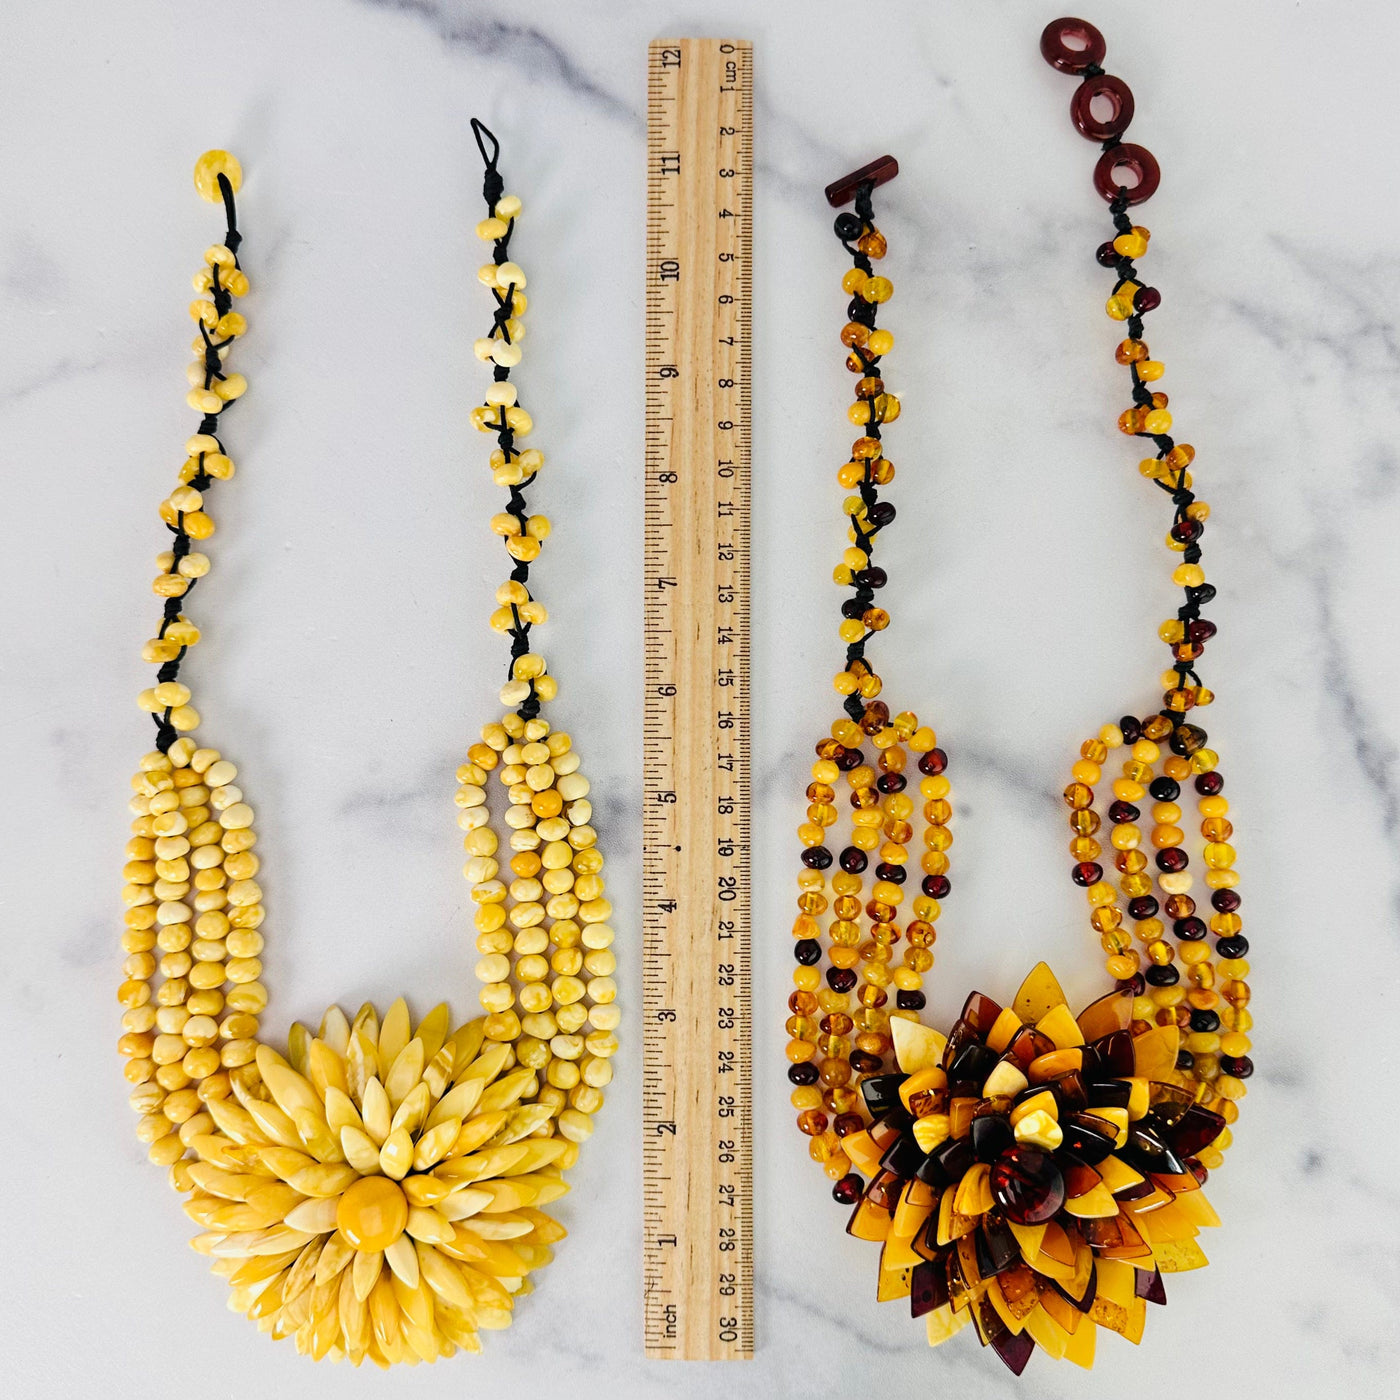 Two Baltic Amber Beaded Flower Necklaces shown on a marble surface with a ruler in between for size reference.